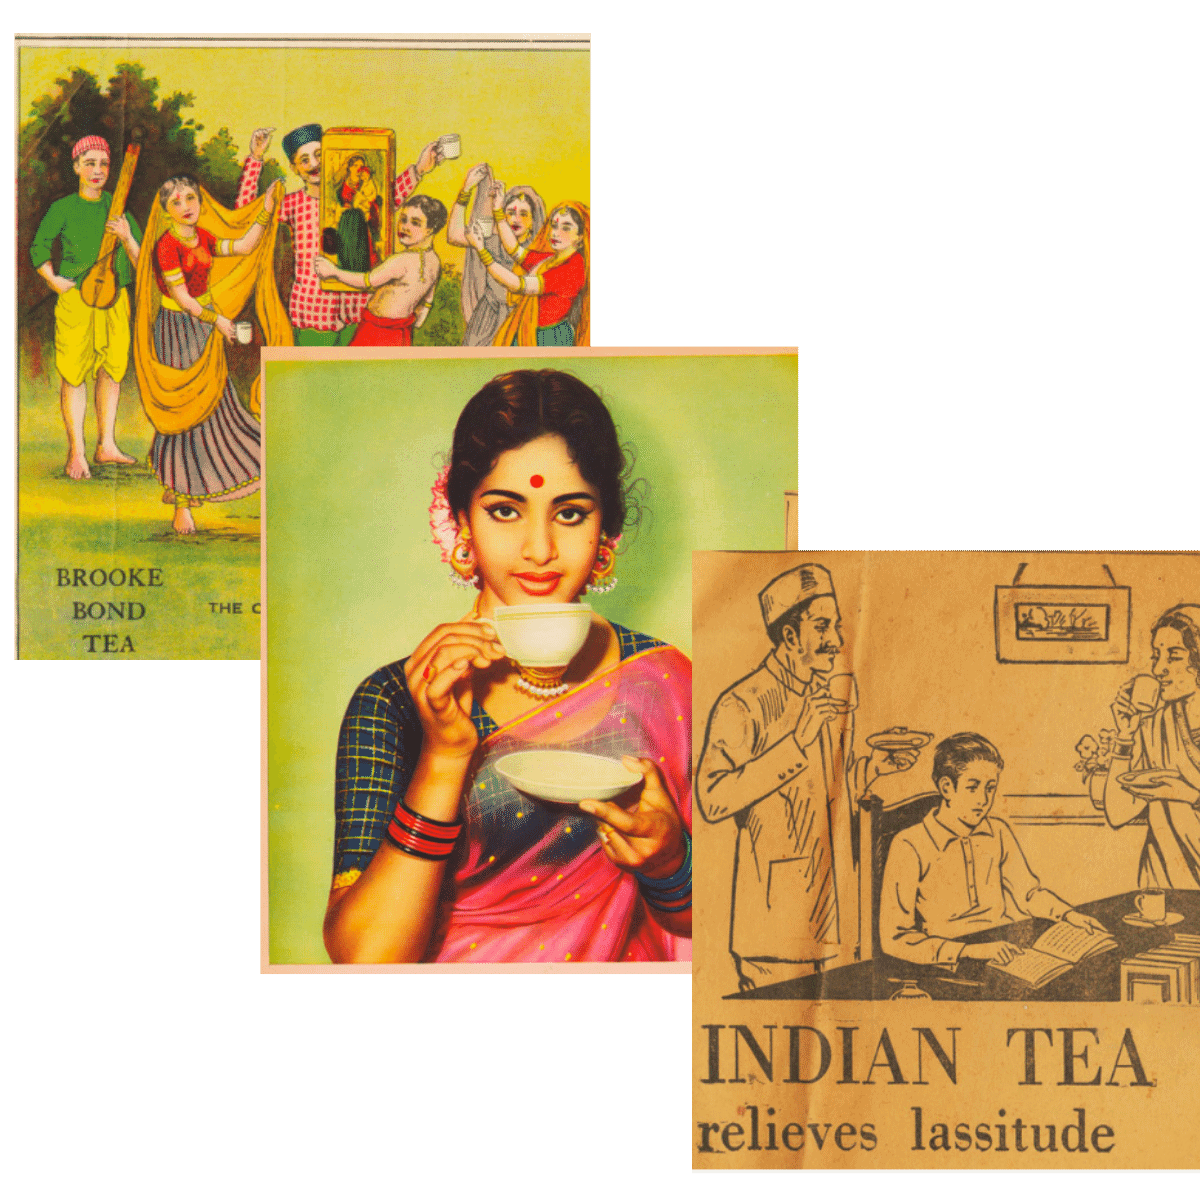 Marketing campaign posters selling tea to the Indian population